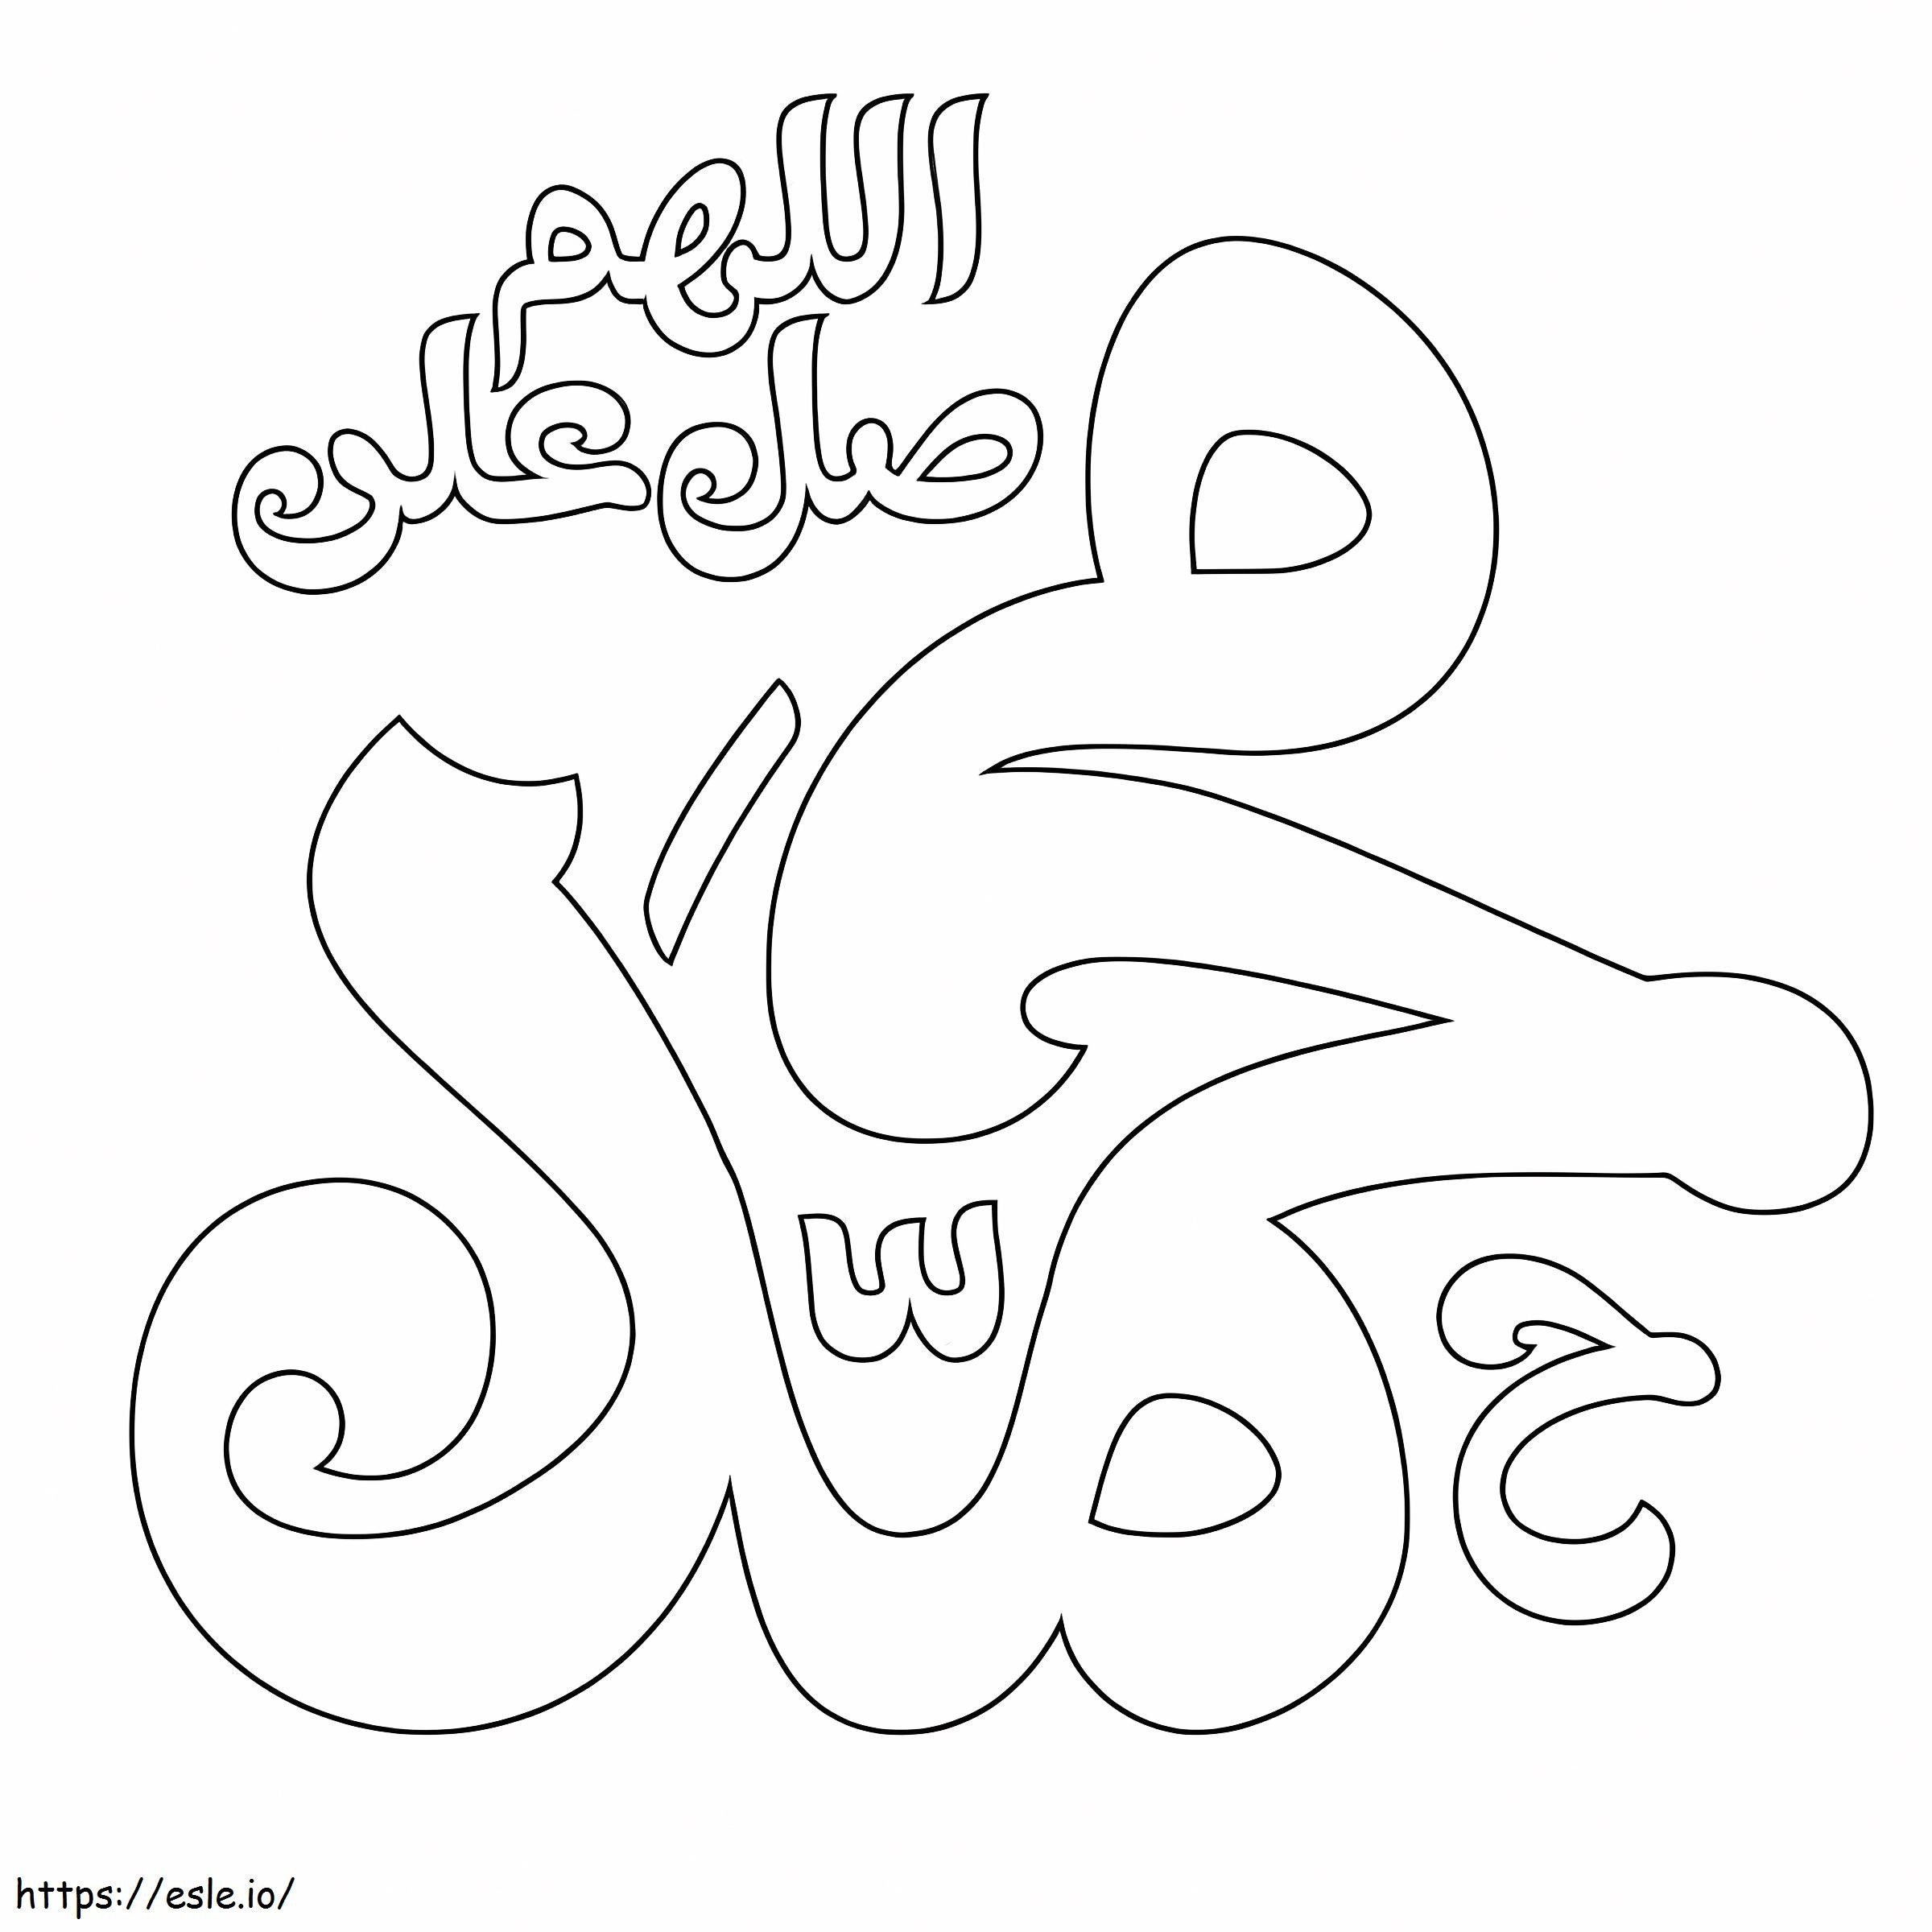 Prophet Muhammad 1 coloring page